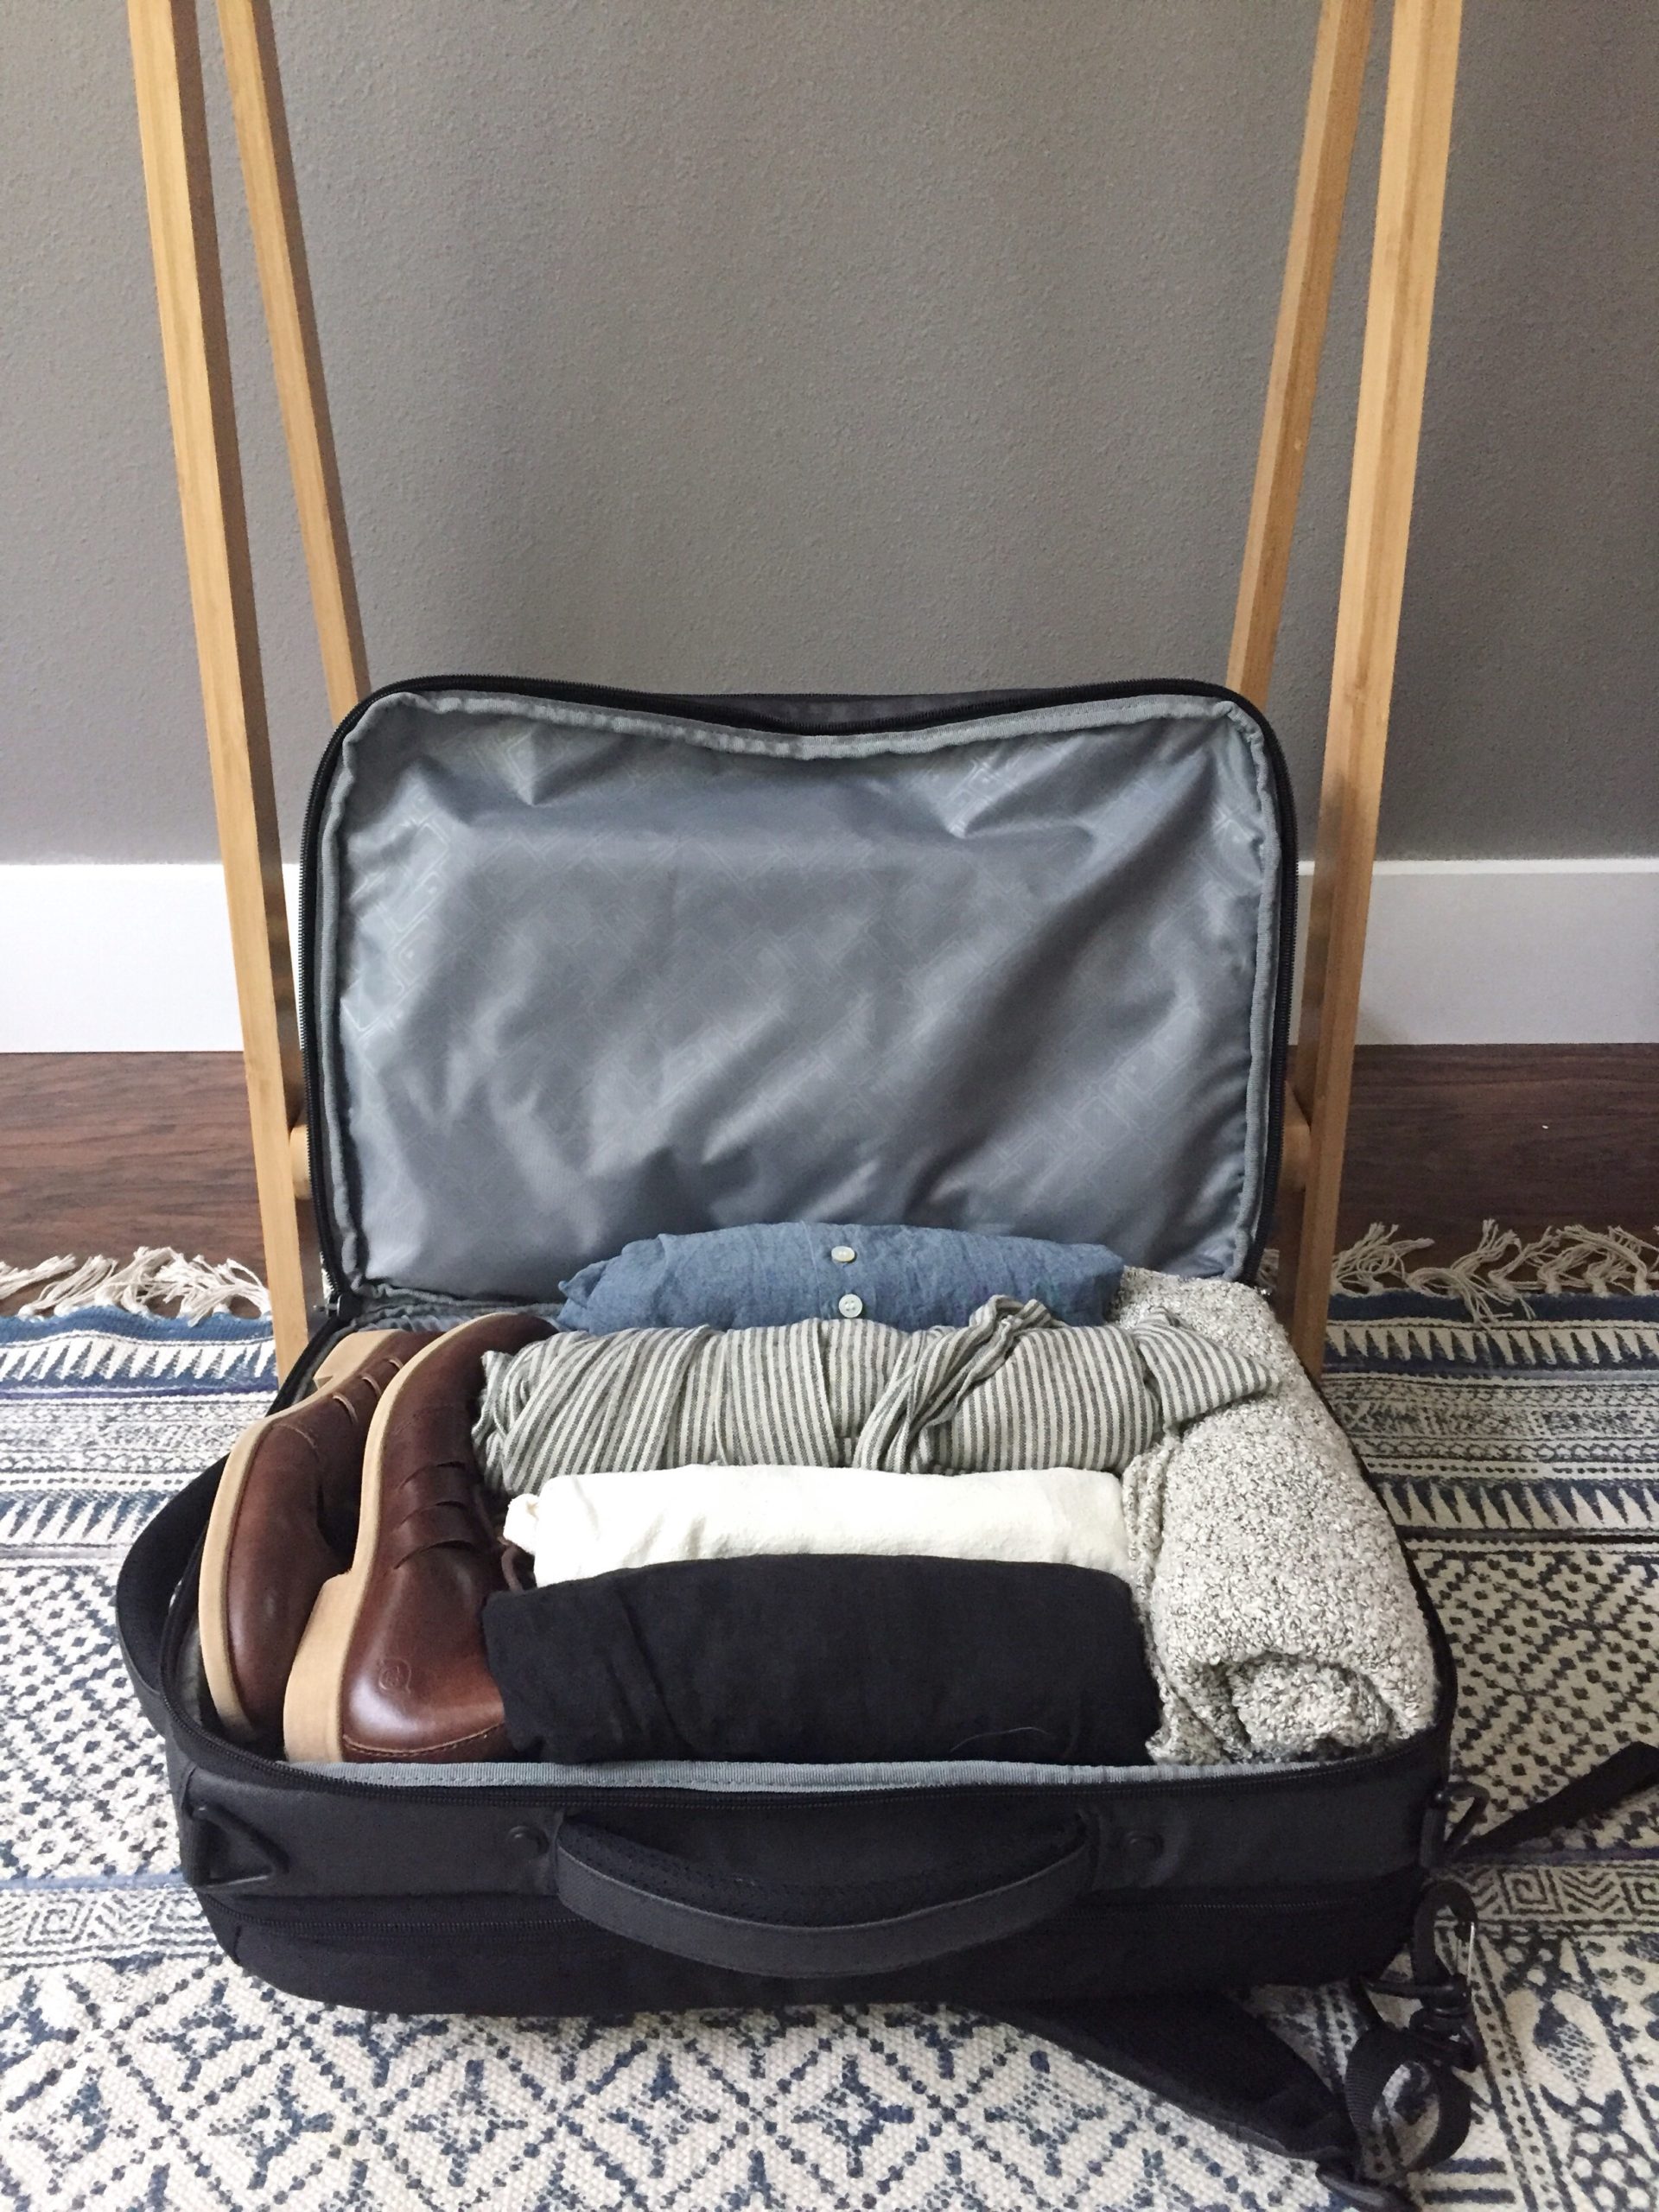 How I packed tops in my carry on luggage